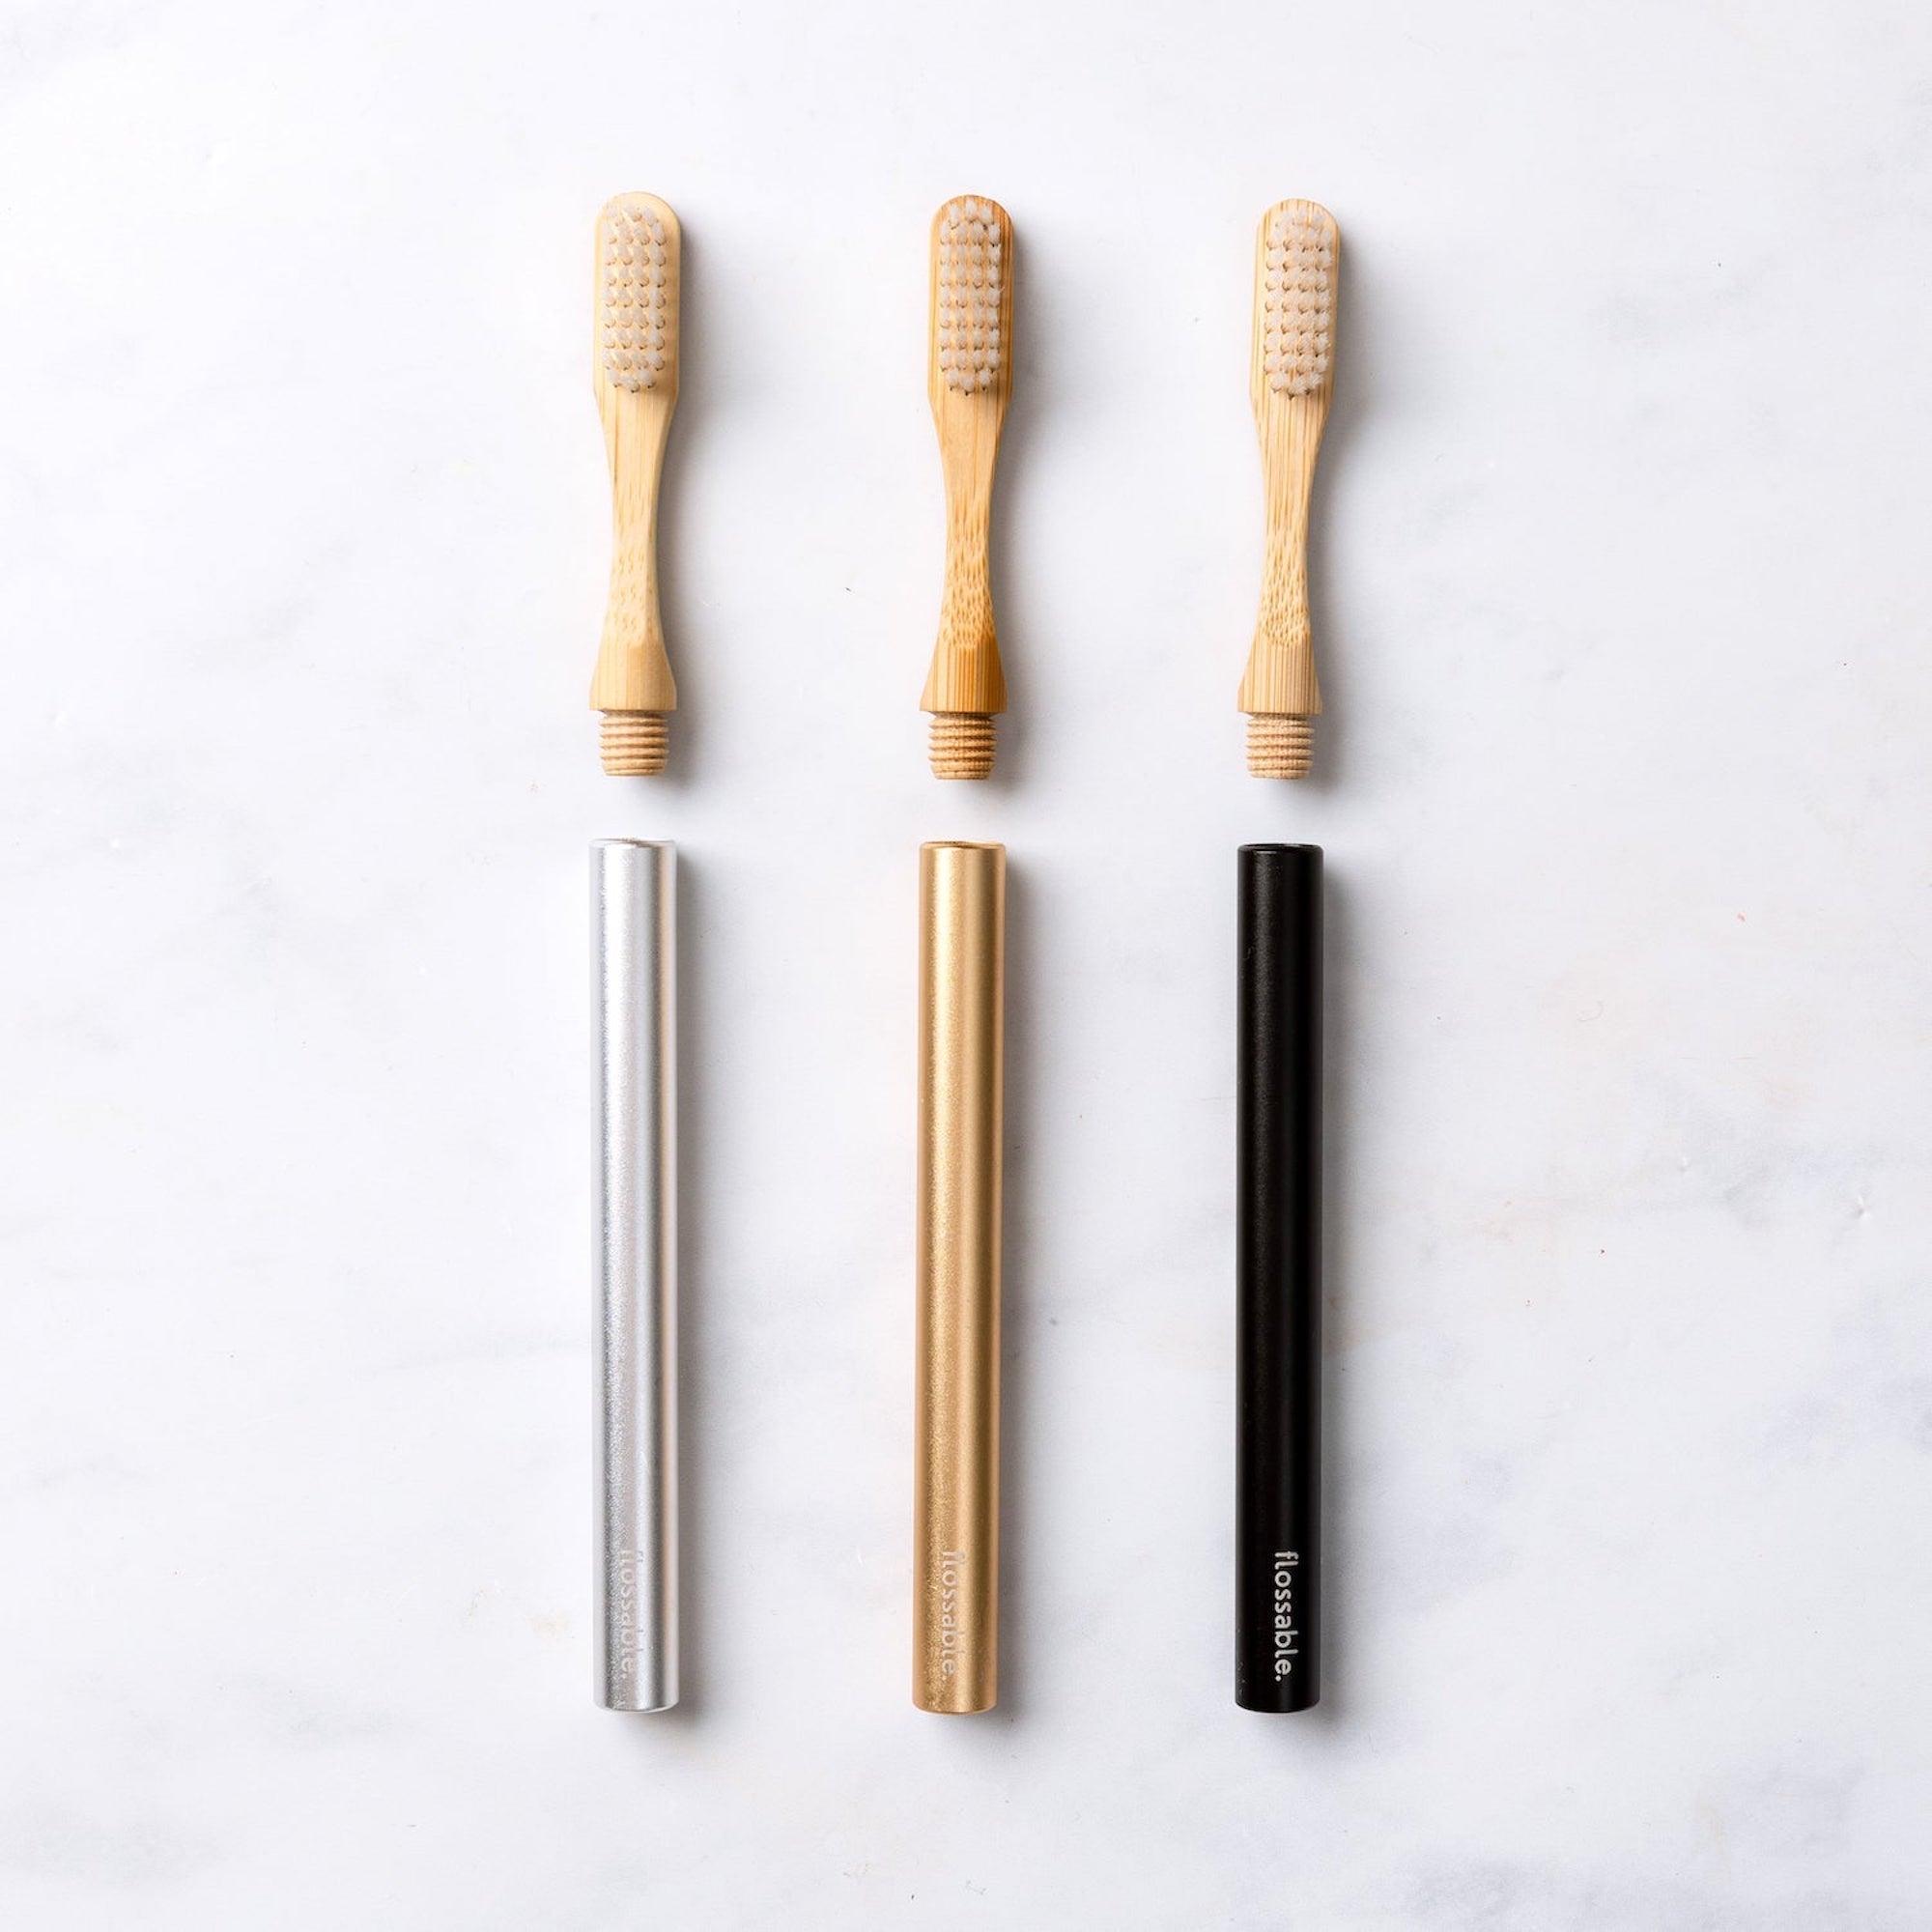 The Silver | Eco-Friendly Toothbrush (Replaceable Heads)